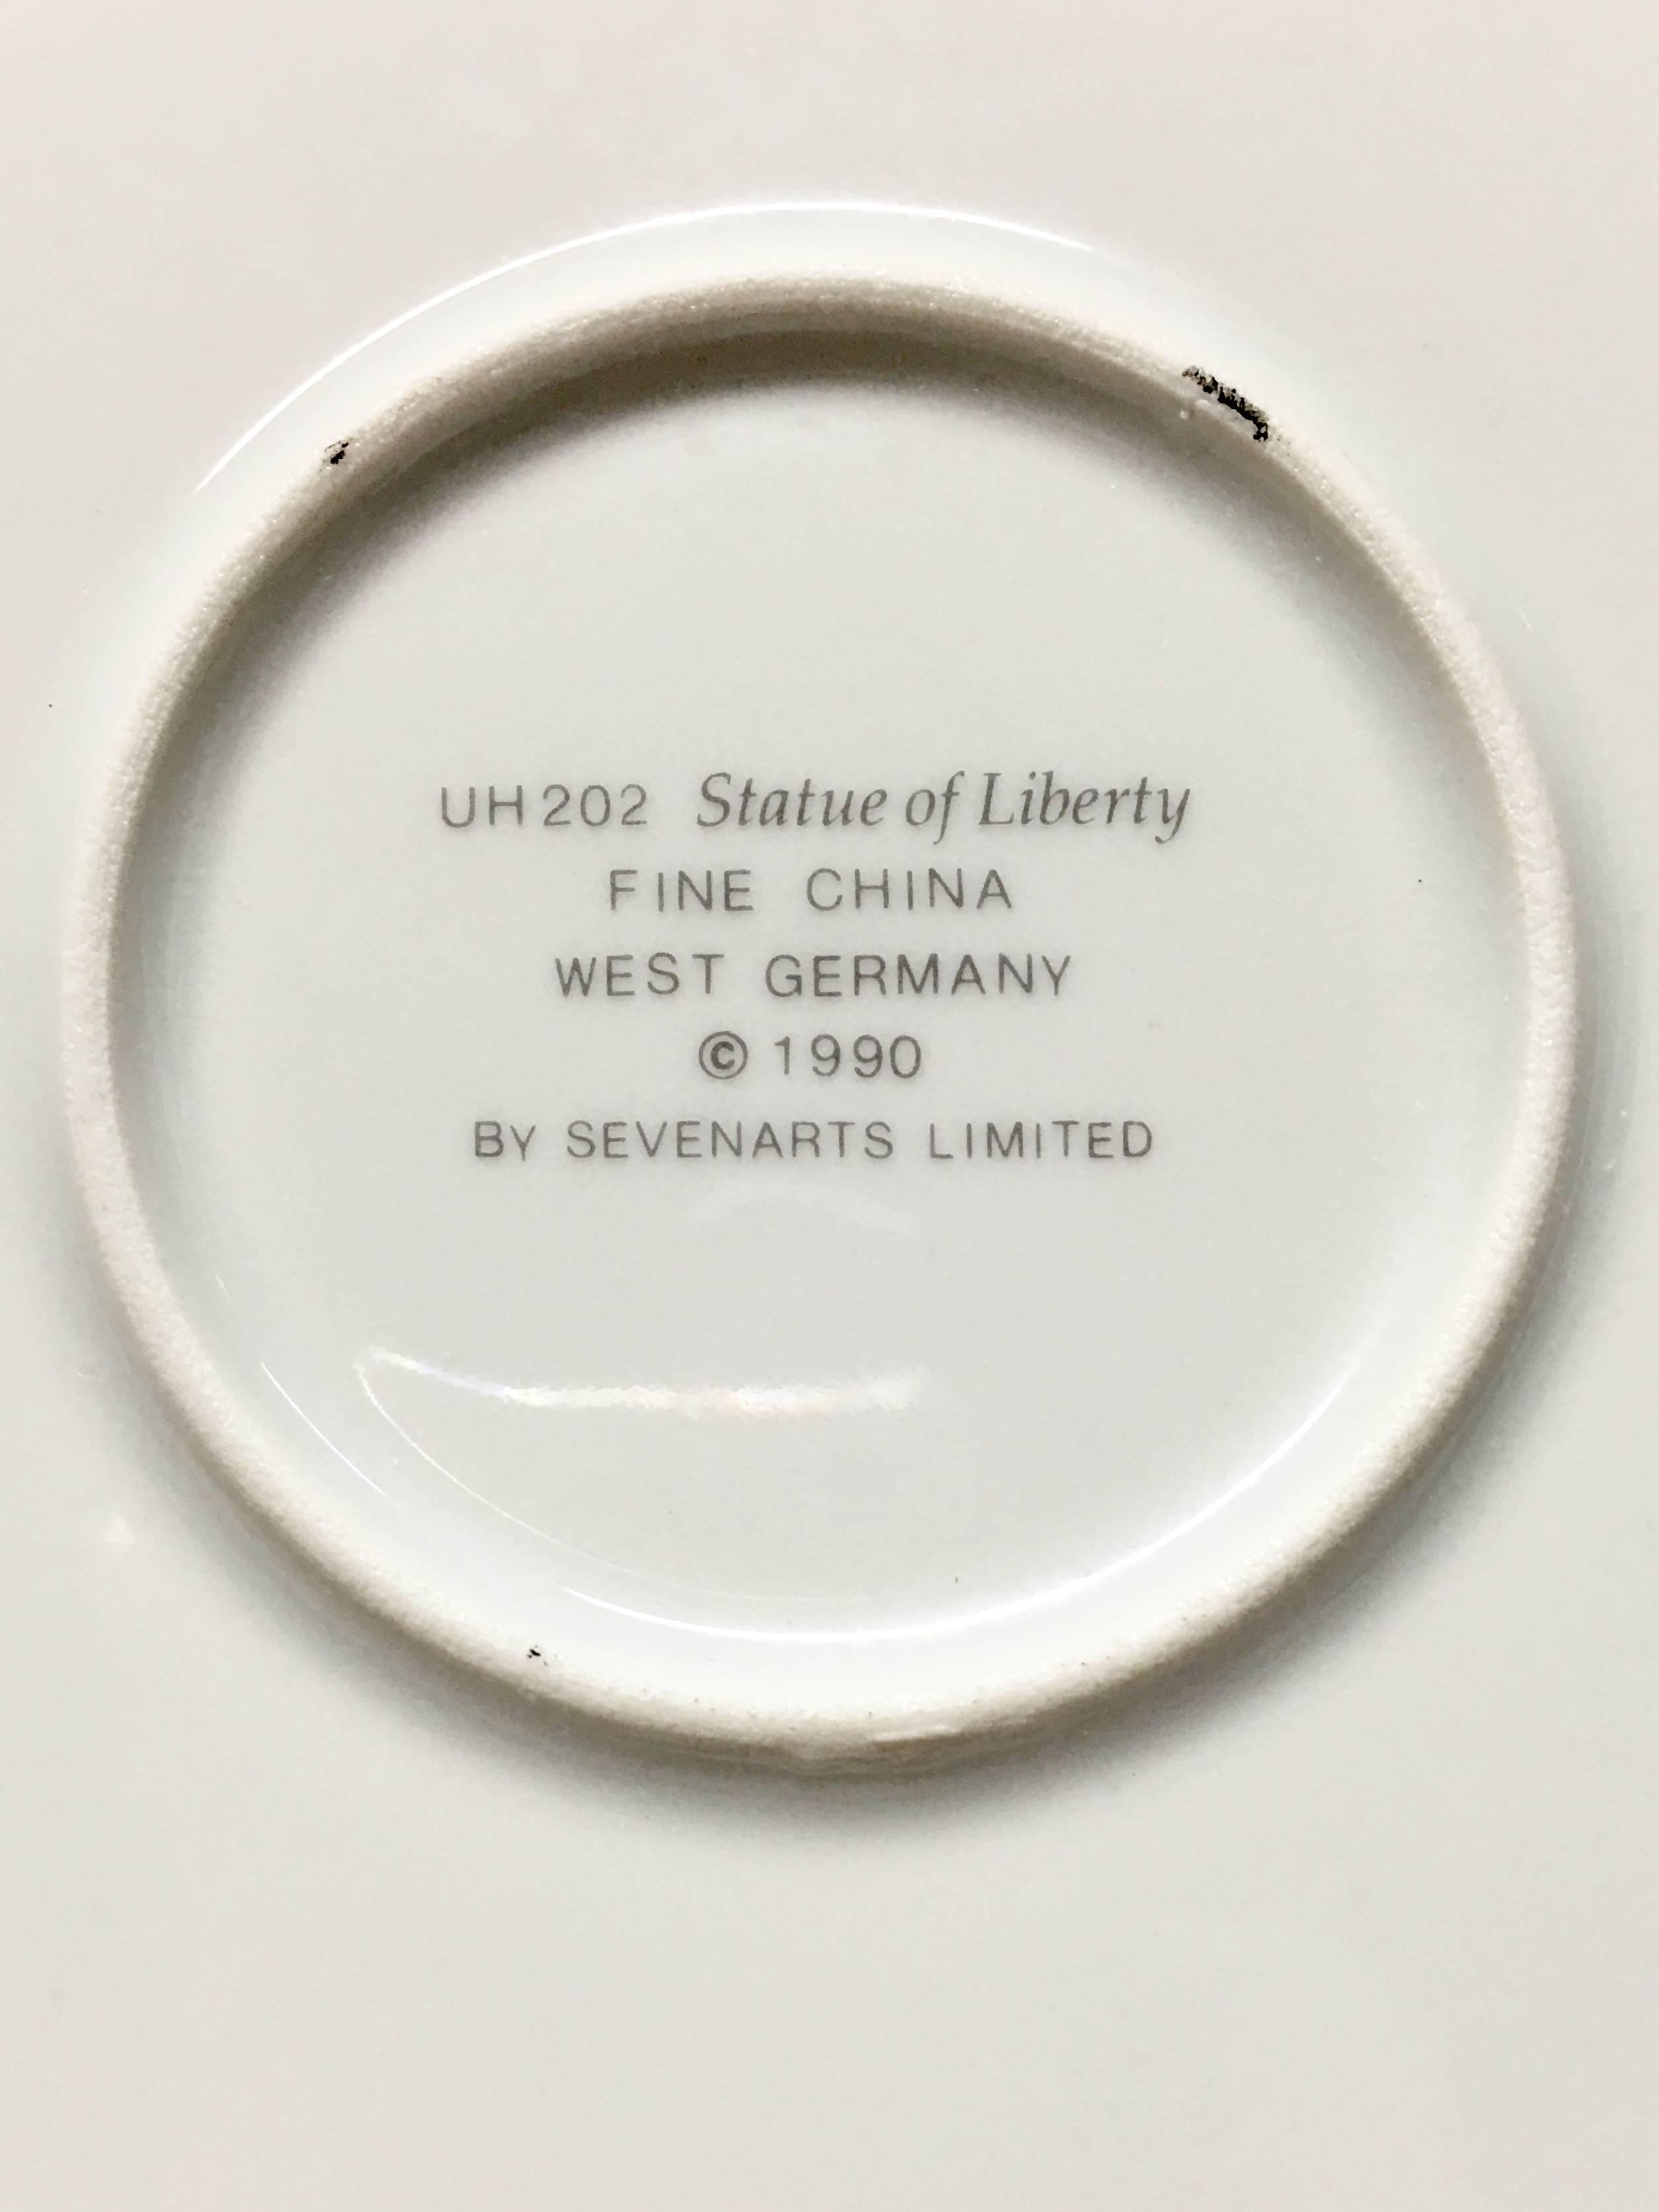 German Erte Limited Edition Statue of Liberty Porcelain Charger Plate